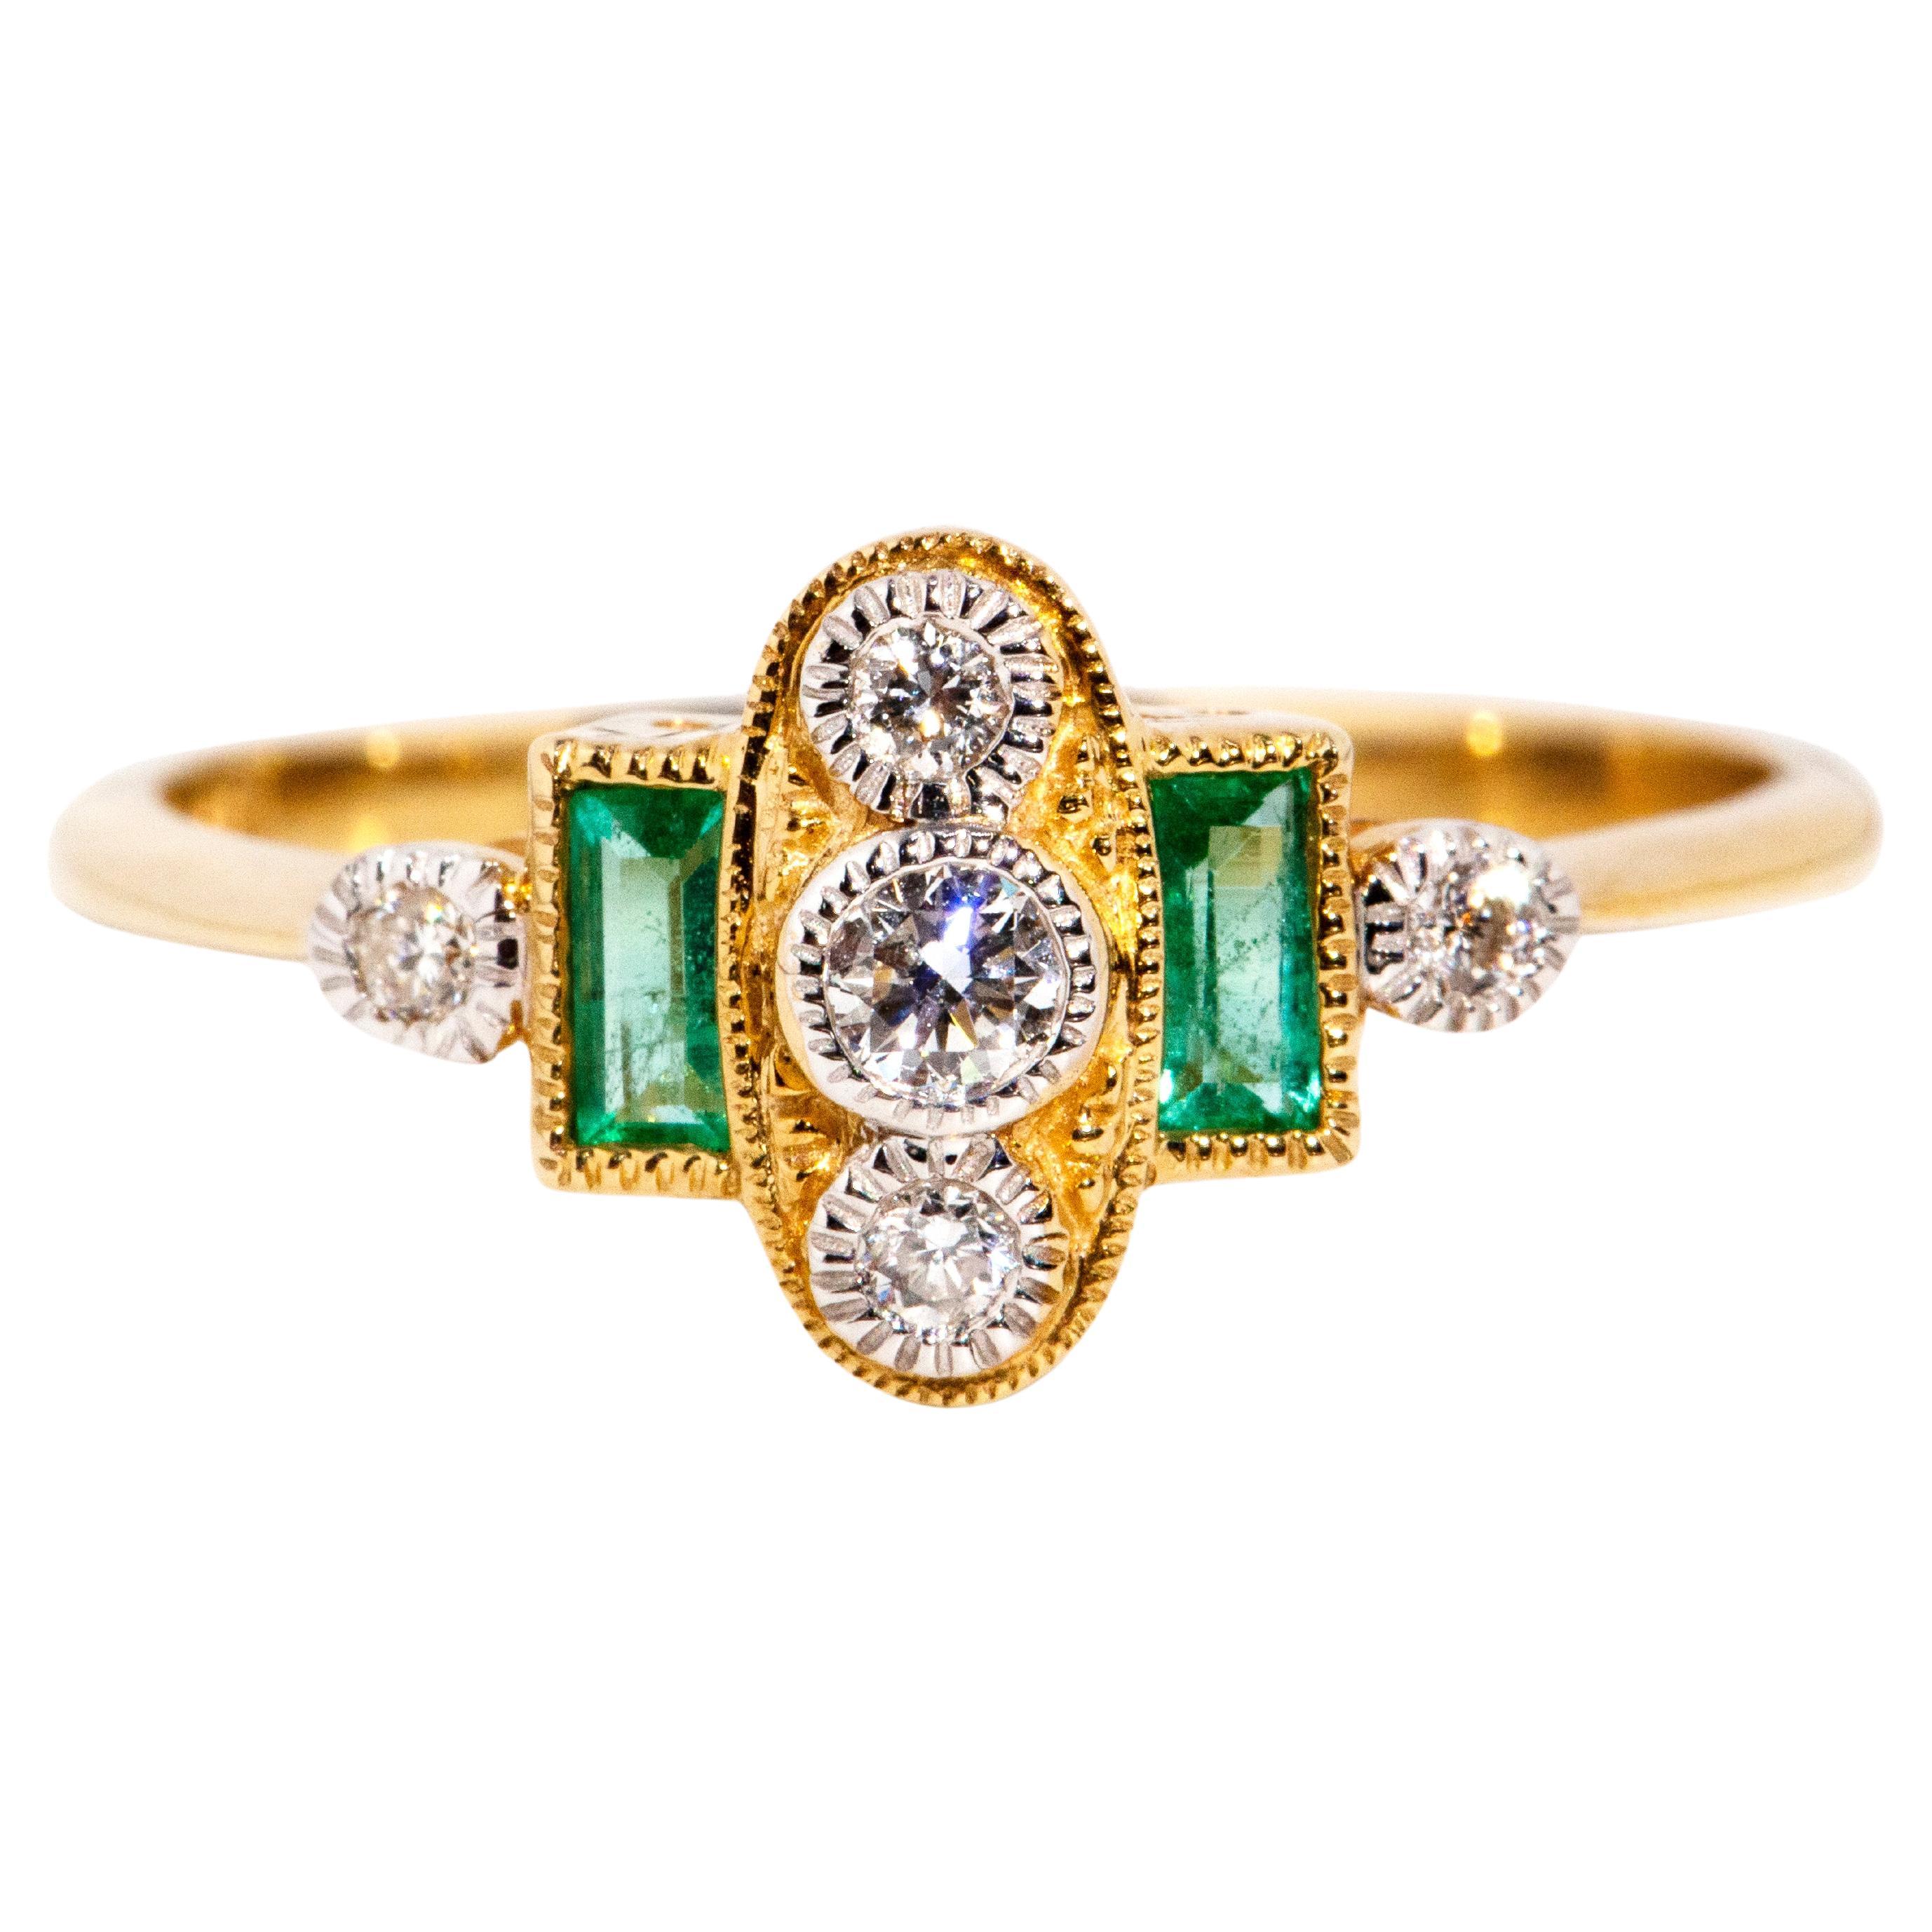 Vintage Inspired Diamond & Bright Green Emerald Cluster Ring 9 Carat Yellow Gold